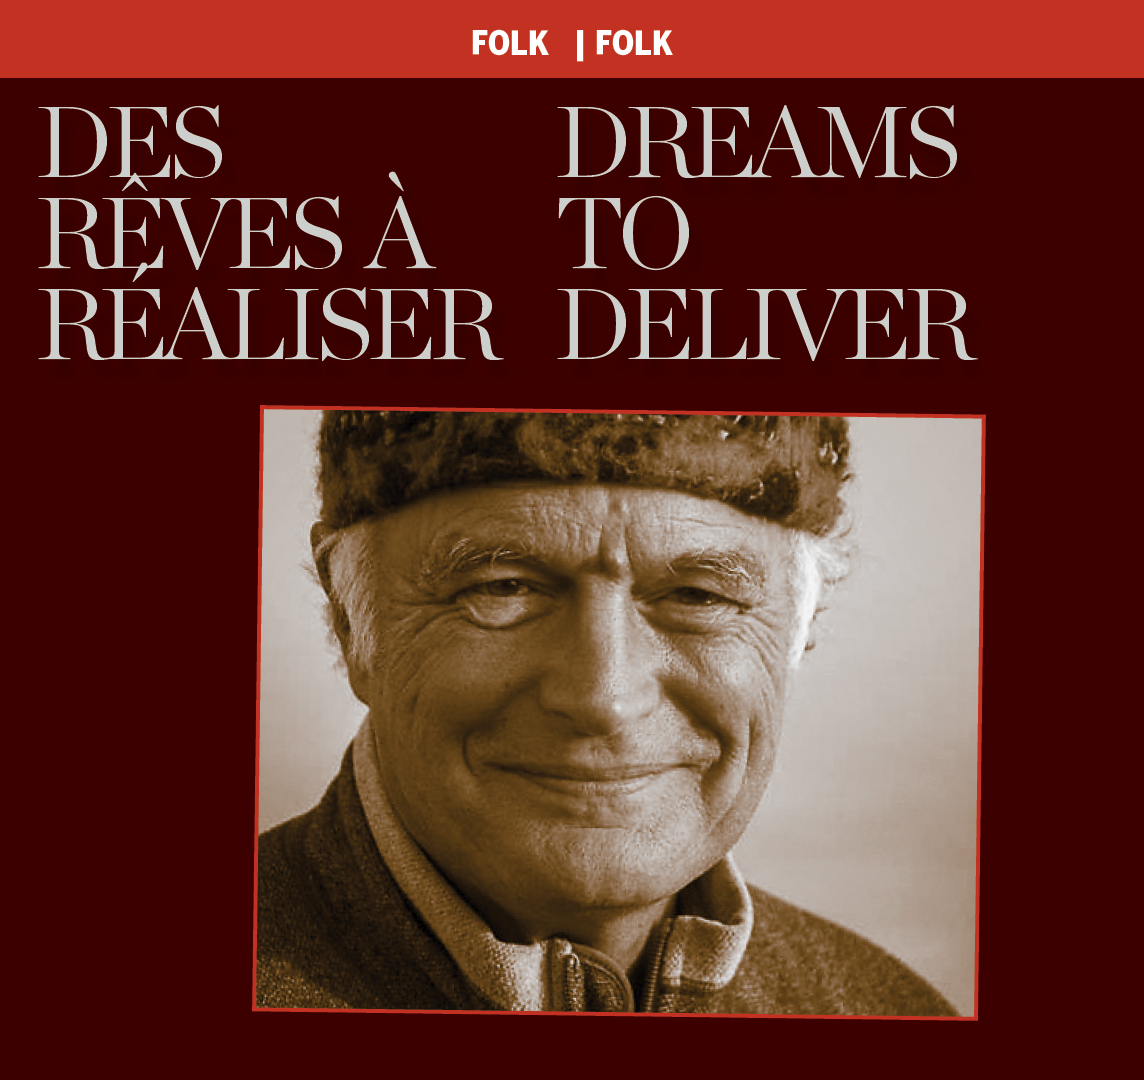 Dreams to Deliver with image of Ian Tamblyn